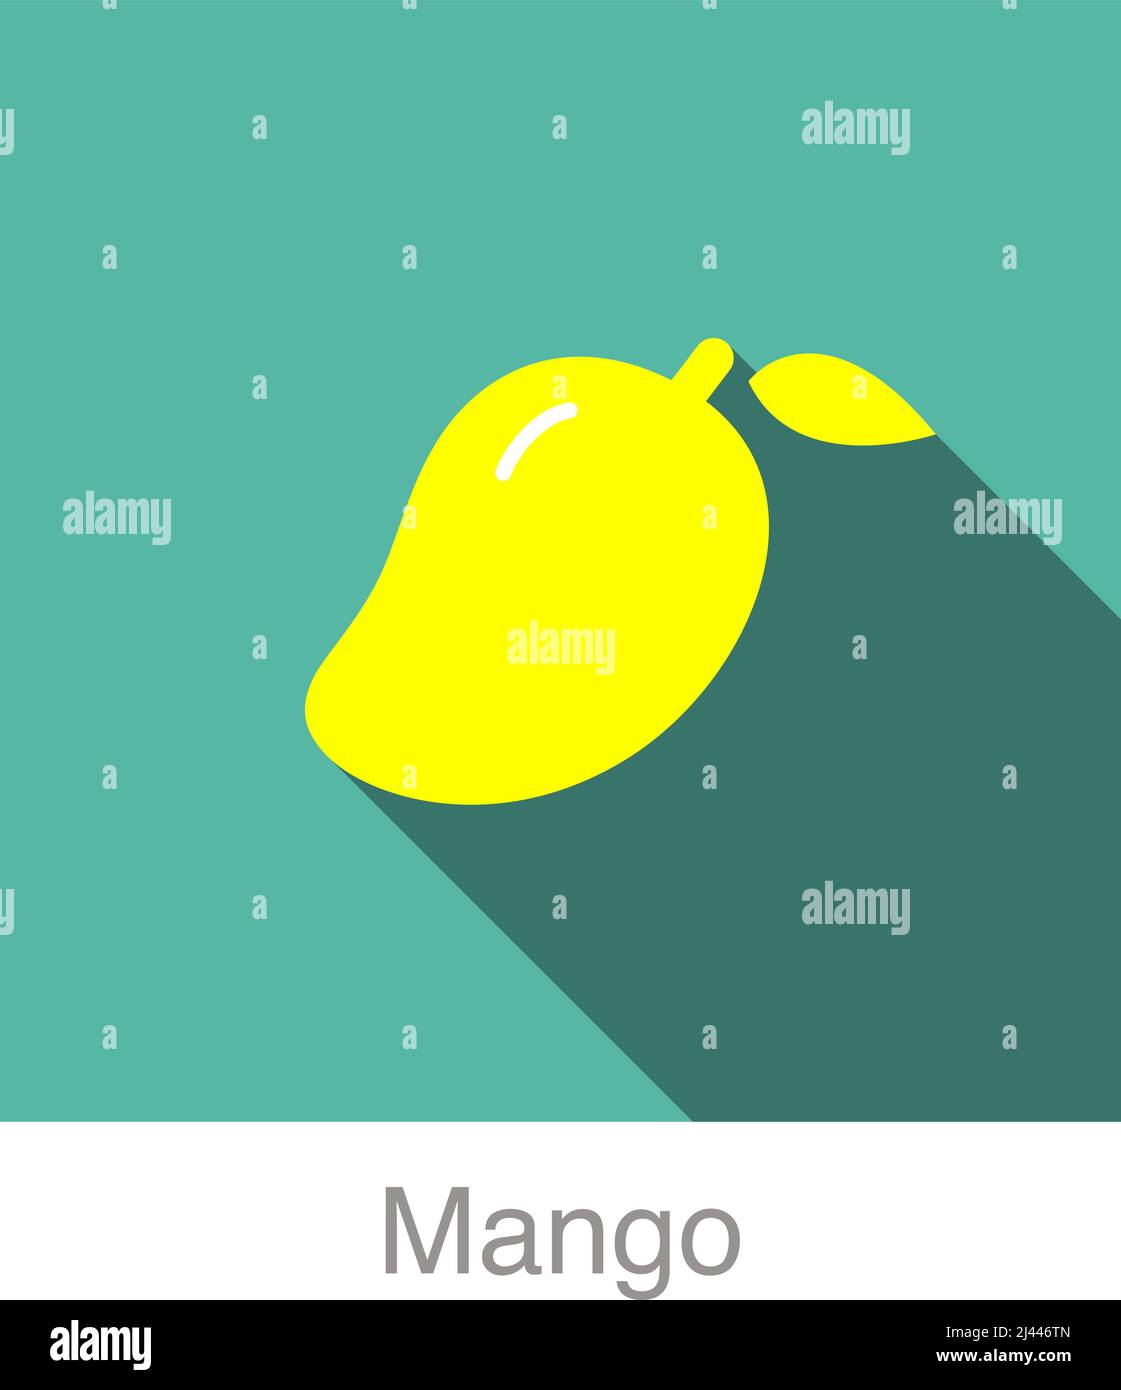 Mango outline Stock Vector Images - Alamy